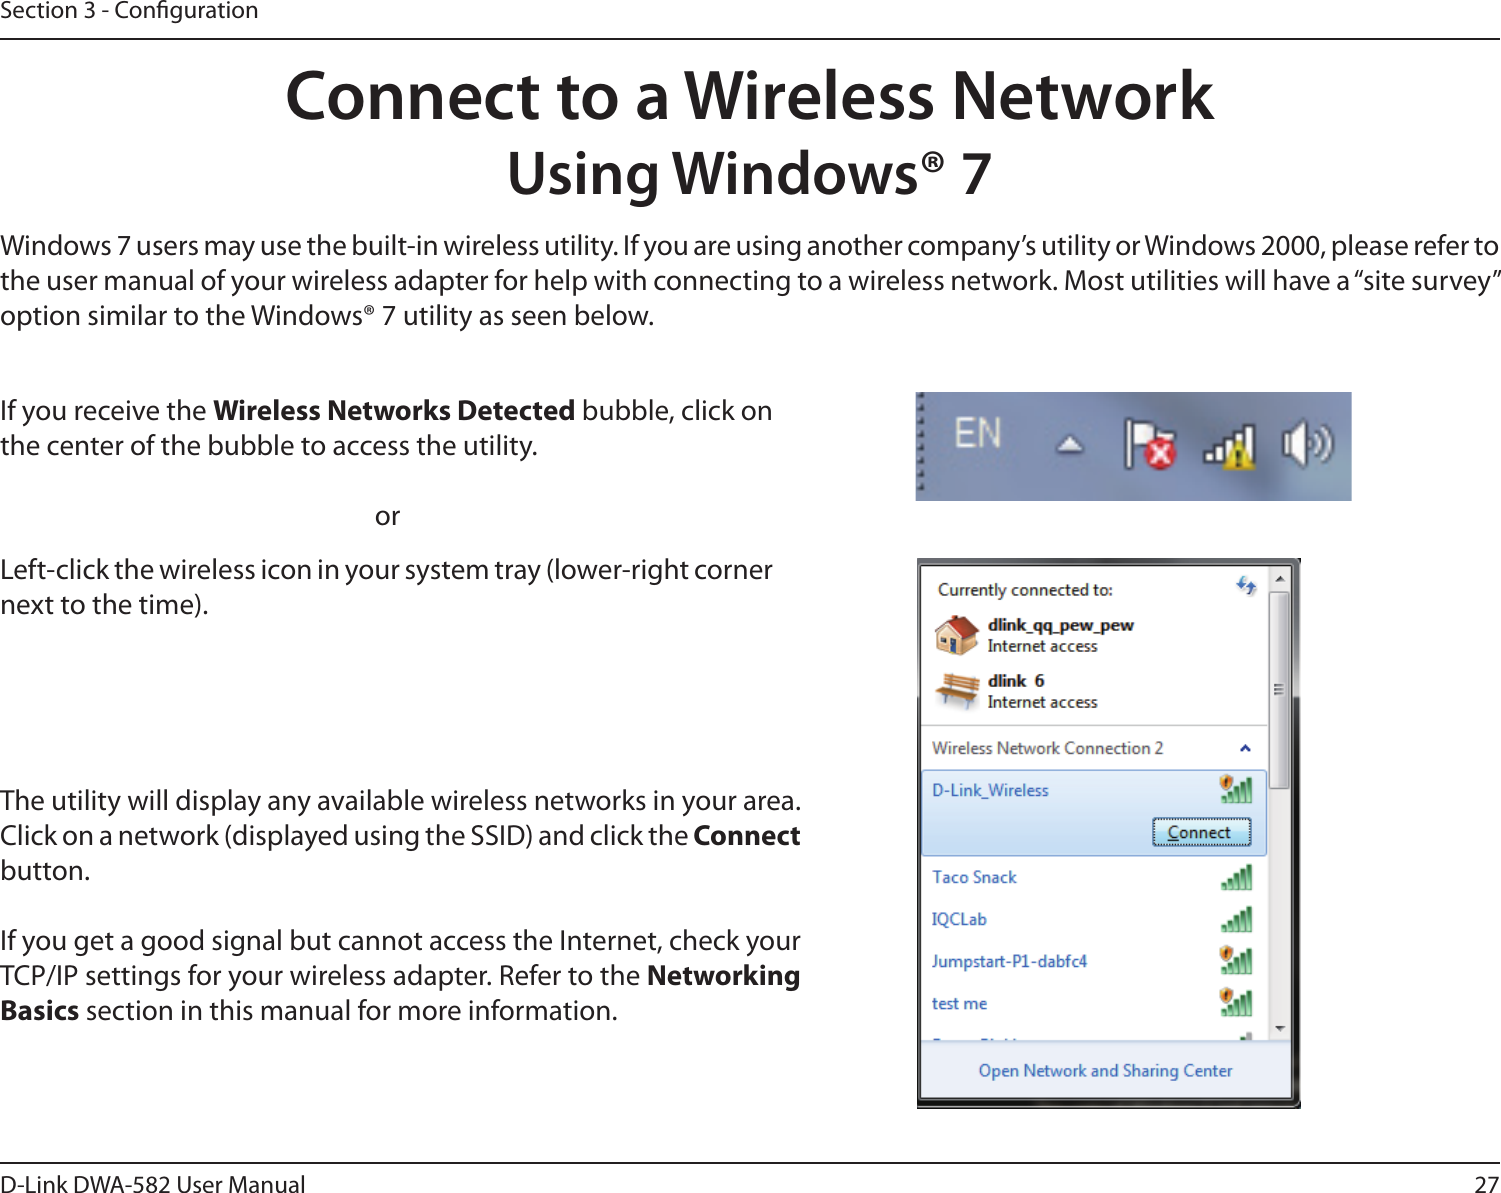 27D-Link DWA-582 User ManualSection 3 - CongurationConnect to a Wireless NetworkUsing Windows® 7Windows 7 users may use the built-in wireless utility. If you are using another company’s utility or Windows 2000, please refer to the user manual of your wireless adapter for help with connecting to a wireless network. Most utilities will have a “site survey” option similar to the Windows® 7 utility as seen below.Left-click the wireless icon in your system tray (lower-right corner next to the time).If you receive the Wireless Networks Detected bubble, click on the center of the bubble to access the utility.     orThe utility will display any available wireless networks in your area. Click on a network (displayed using the SSID) and click the Connect button.If you get a good signal but cannot access the Internet, check your TCP/IP settings for your wireless adapter. Refer to the Networking Basics section in this manual for more information.